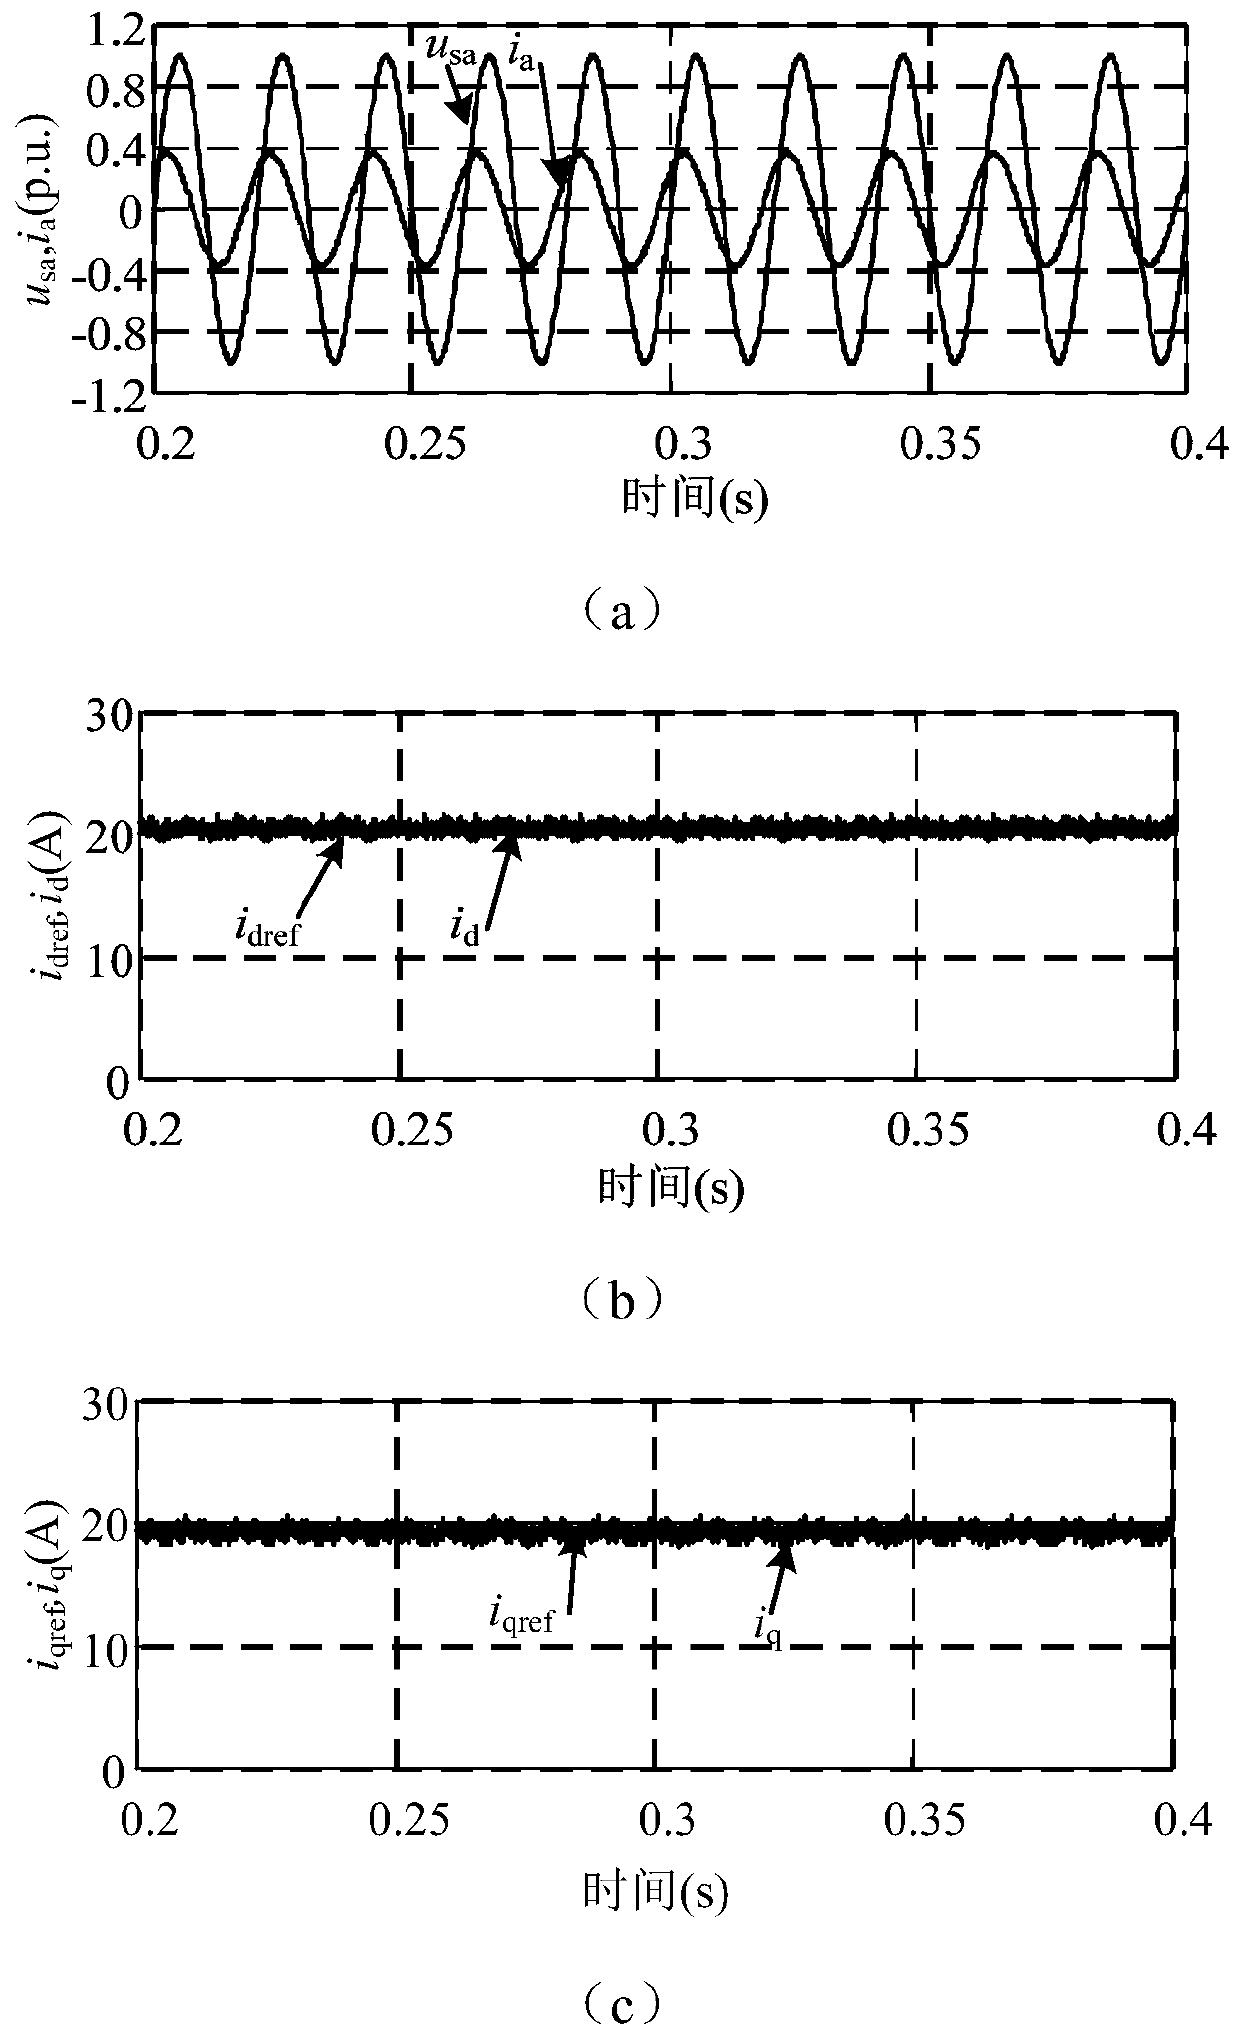 Improved passive control method for three-phase grid-connected inverter based on disturbance observer compensation